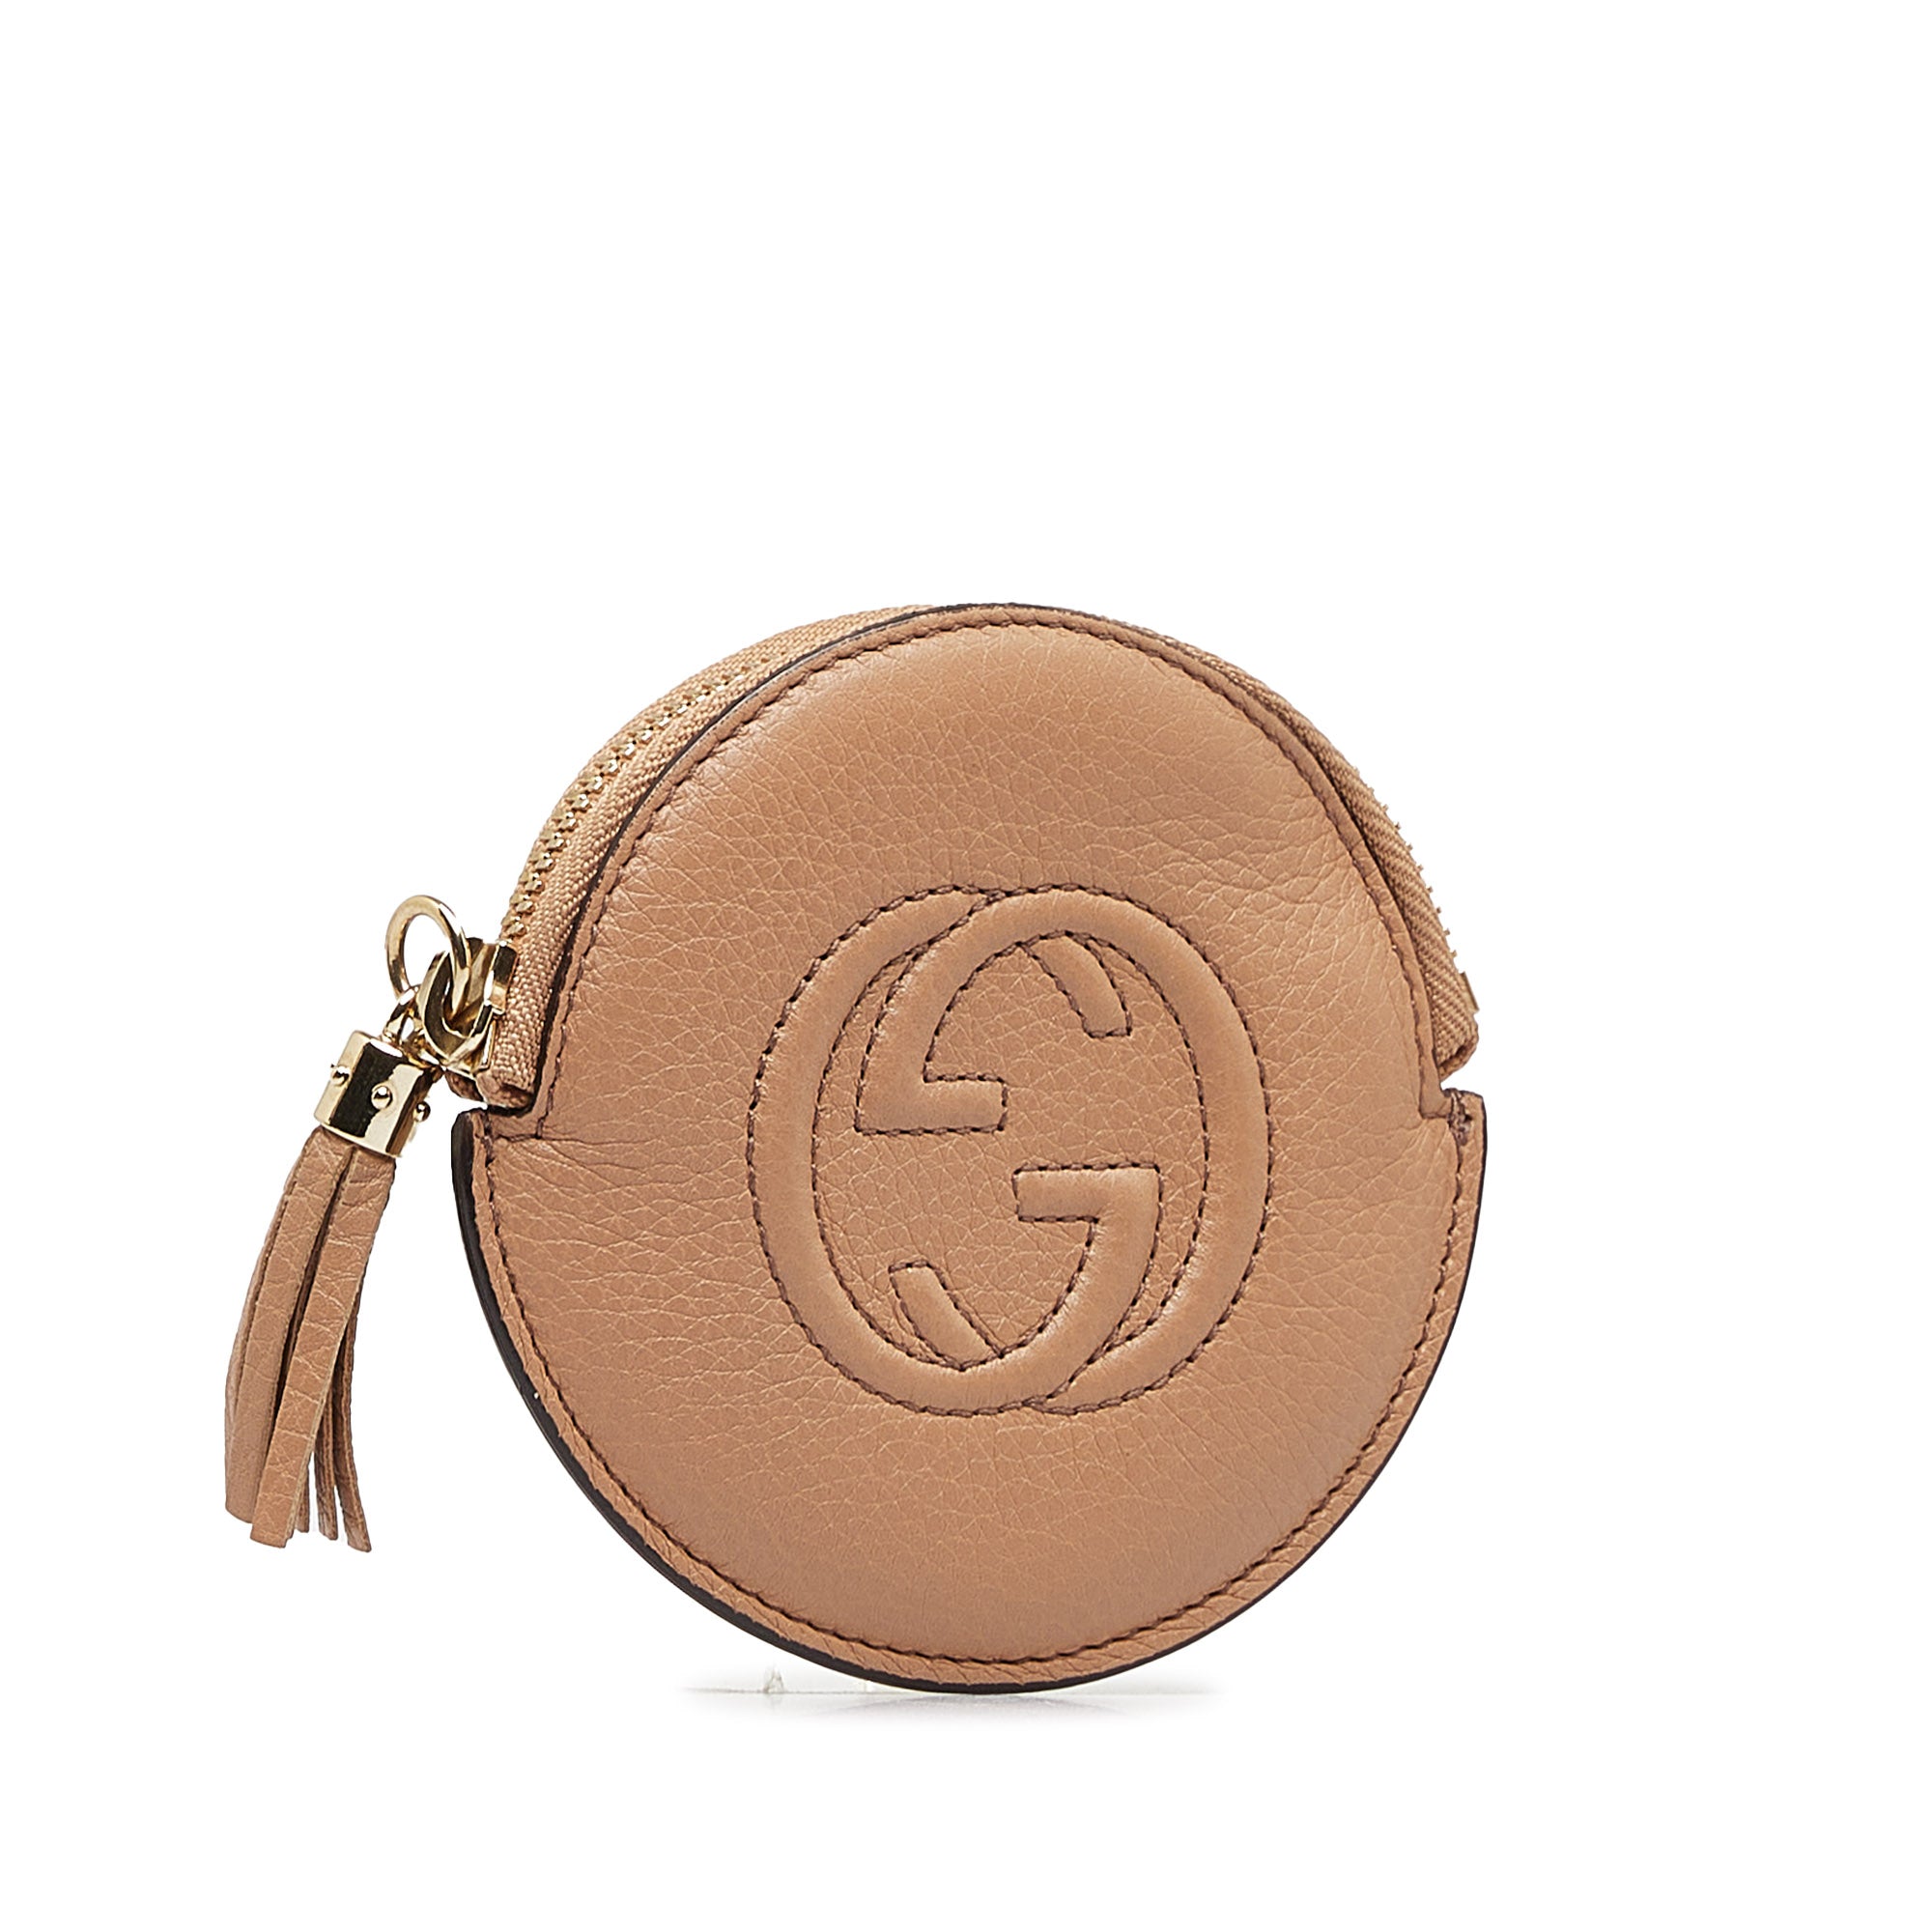 Removable Round Coin Purse Of The Multipochette Accessoires Designer  Fashion Womens Key Pouch Card Holder Cles Mini Zipped Organiz248E From  Foigj55, $44.52 | DHgate.Com